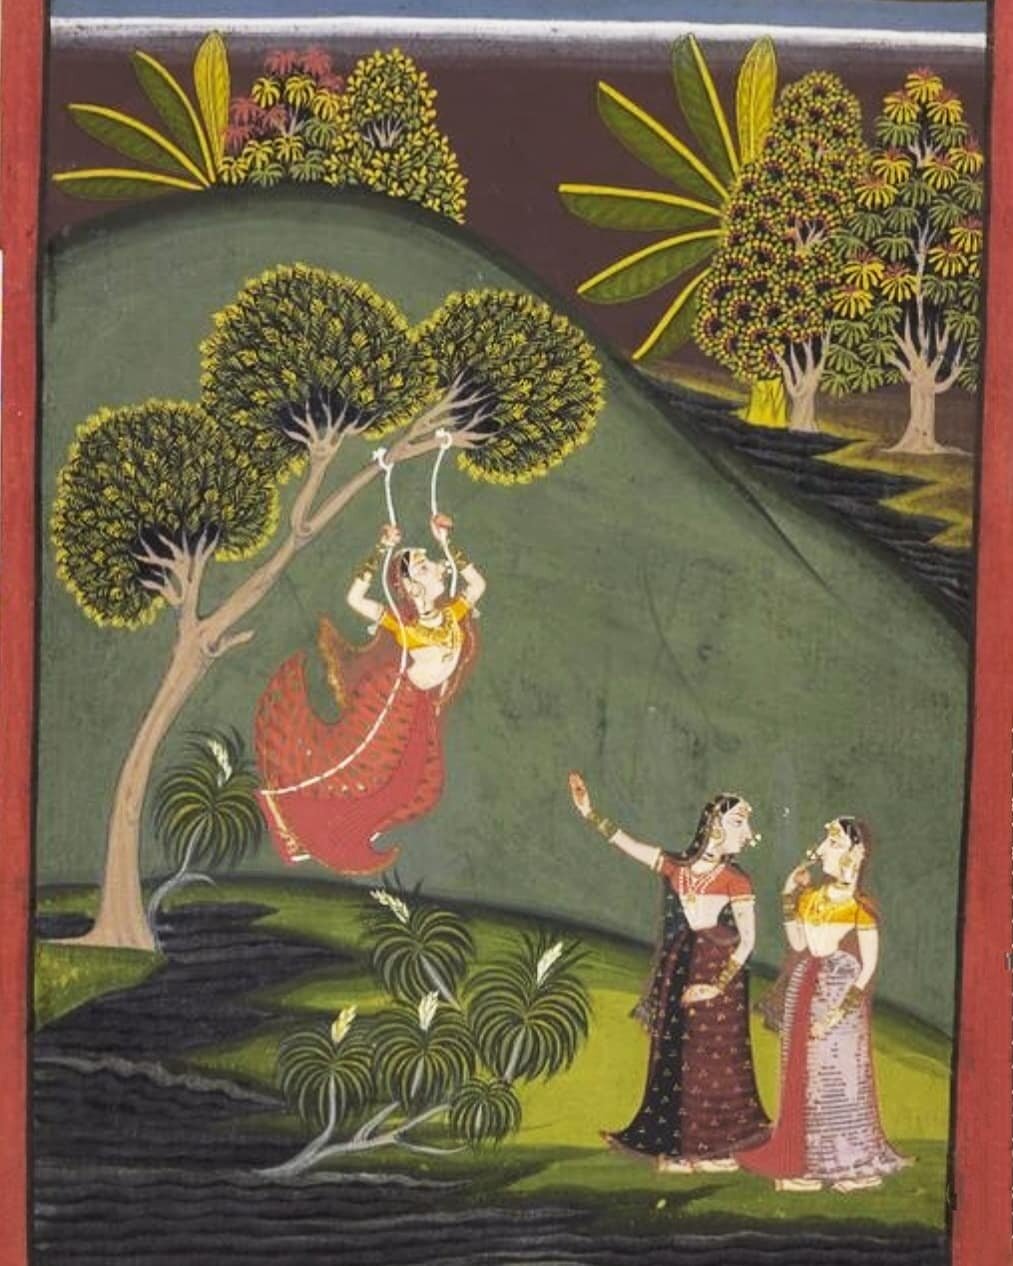 Women in leisure, one woman is swinging on a peepul tree while other two have a conversation. Found in a collection of Barahmasa (song of the seasons) series, these miniatures were made in circa 1680-1700. 

These paintings from Mewar (now Rajasthan,